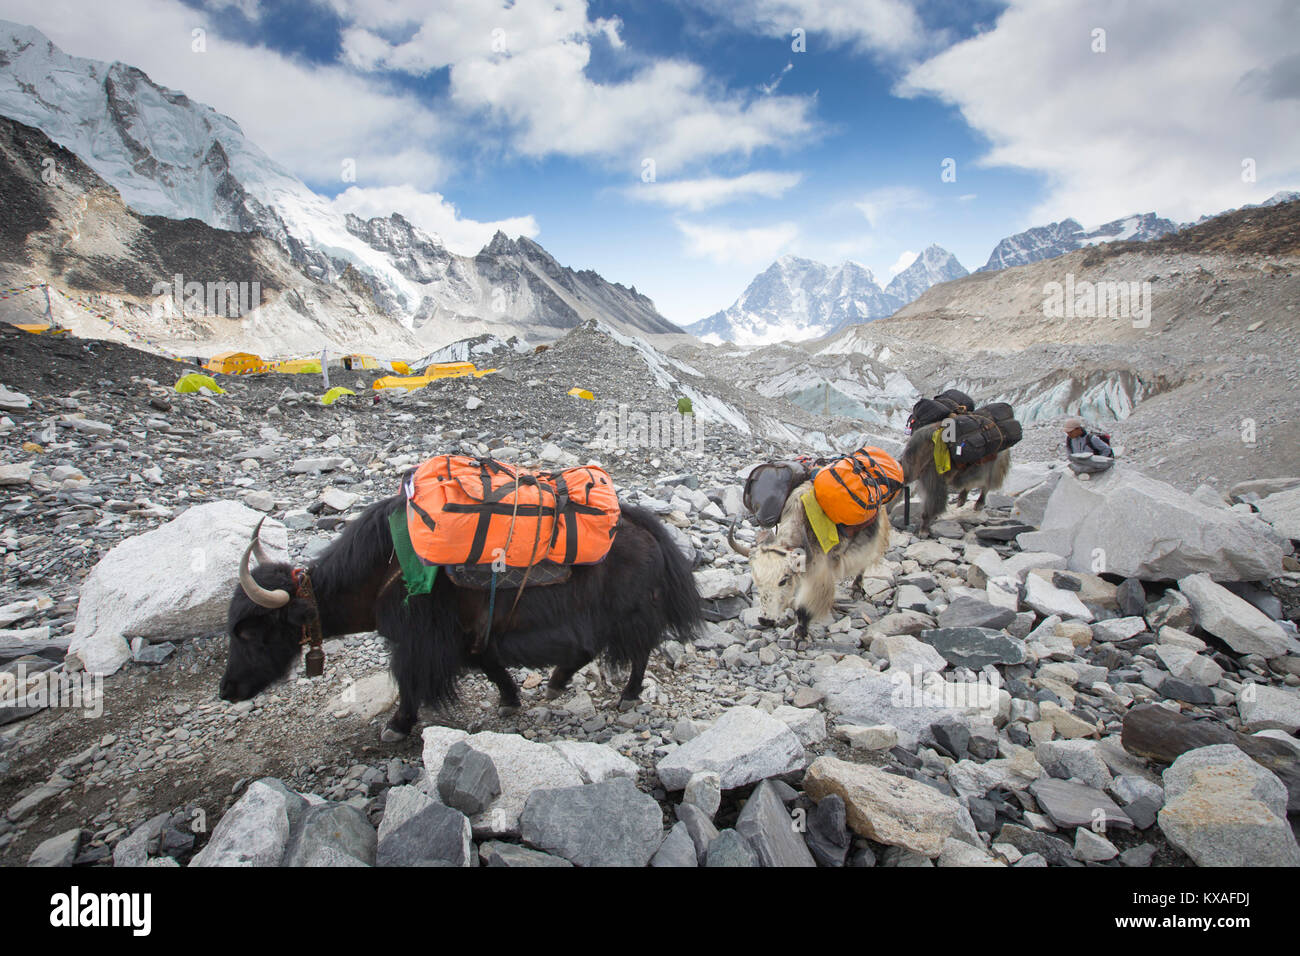 Yaks are entering Everest base camp (5364 meters / 17,598 ft) after carrying loads of climbers all the way from Lukla. Stock Photo